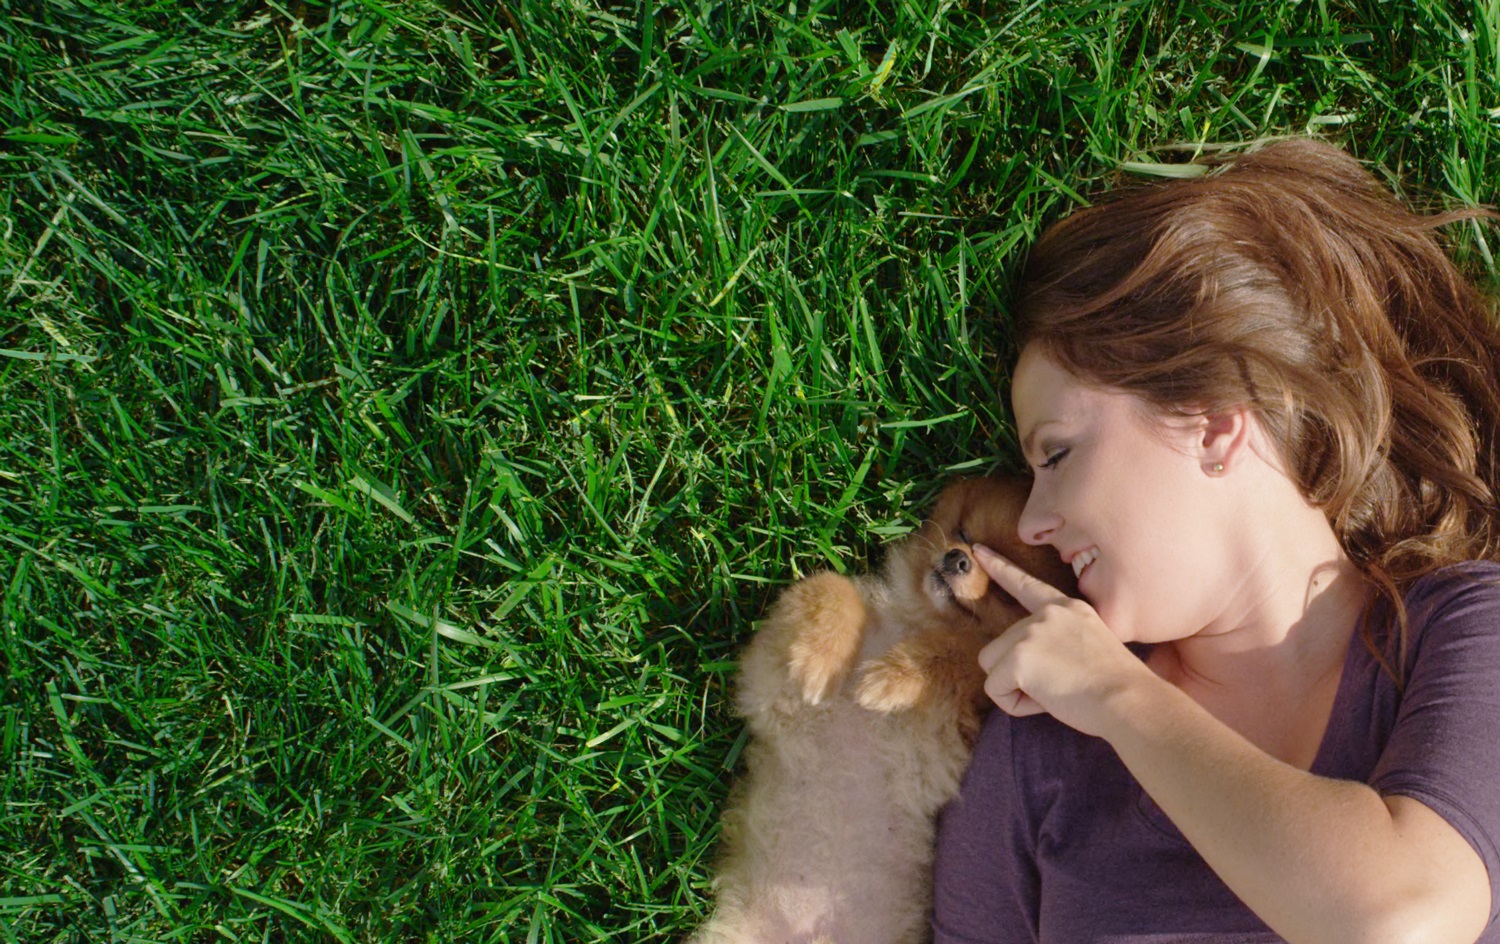 Pretty Woman playing with cute puppy on manicured green grass showing lawn care in Waco